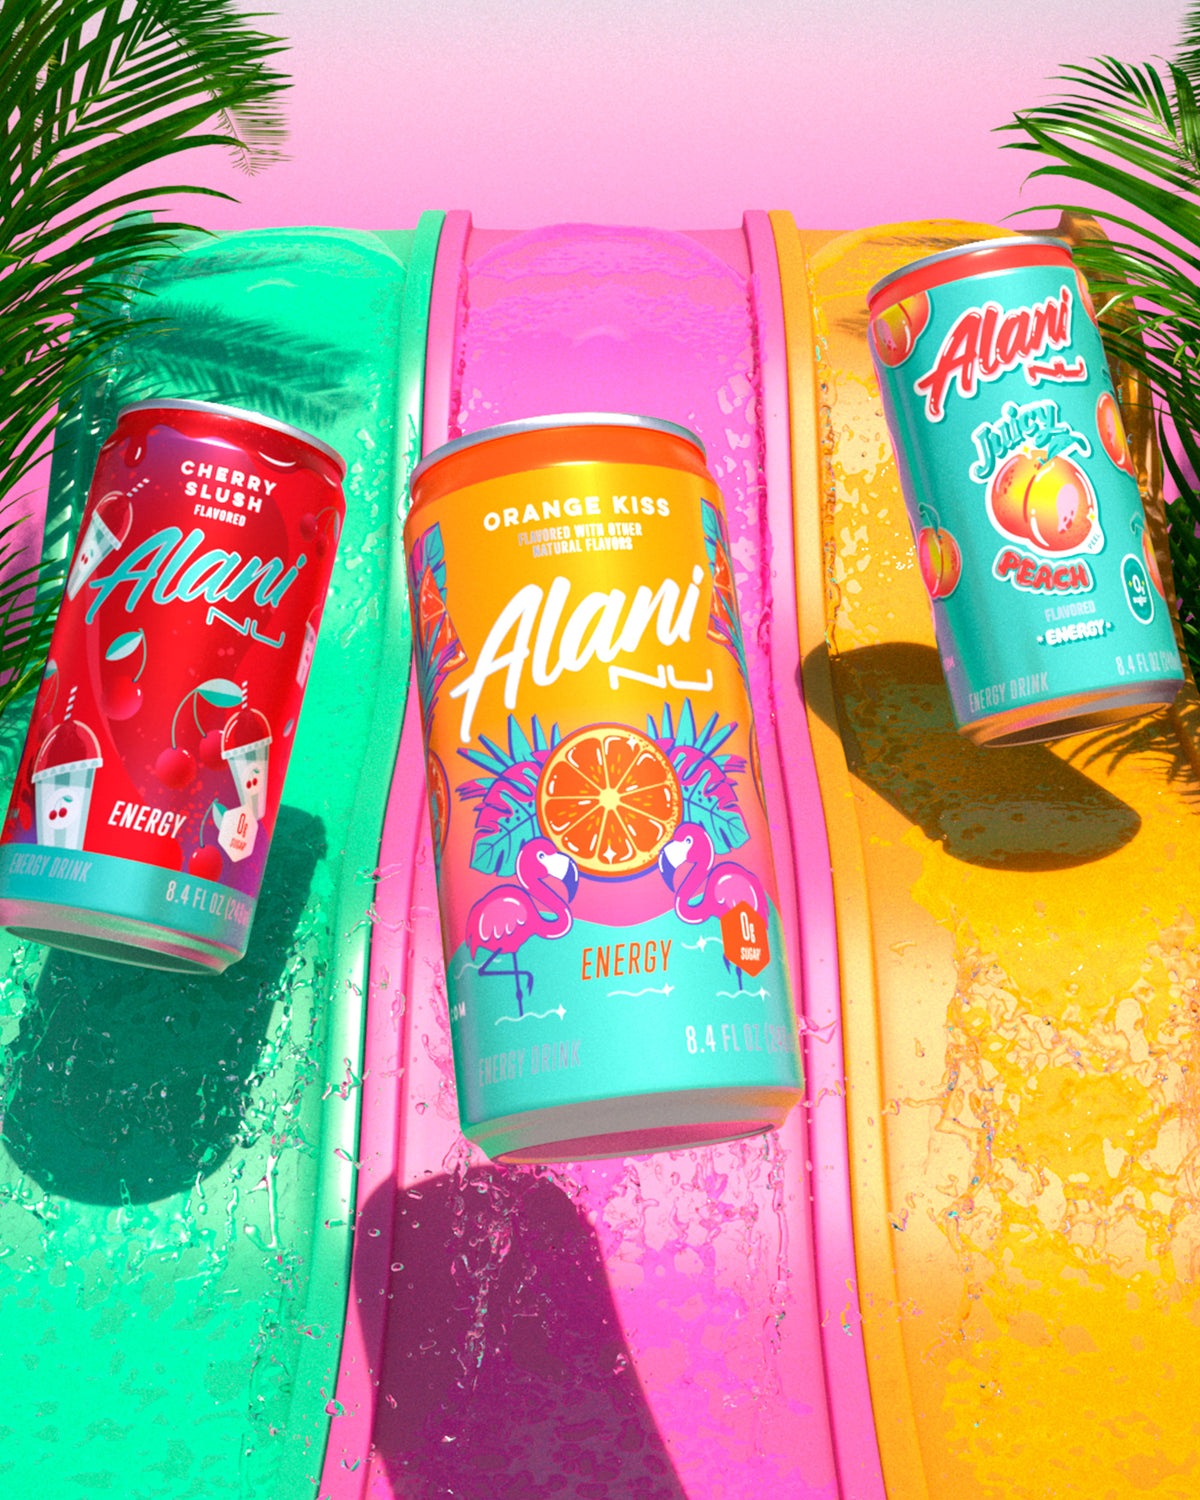 Mini Alani energy drinks,  each with vibrant and colorful designs, are placed on a wet surface with splashes of water around them. From left to right, the flavors are Cherry Slush, Orange Kiss, and Juicy Peach. 